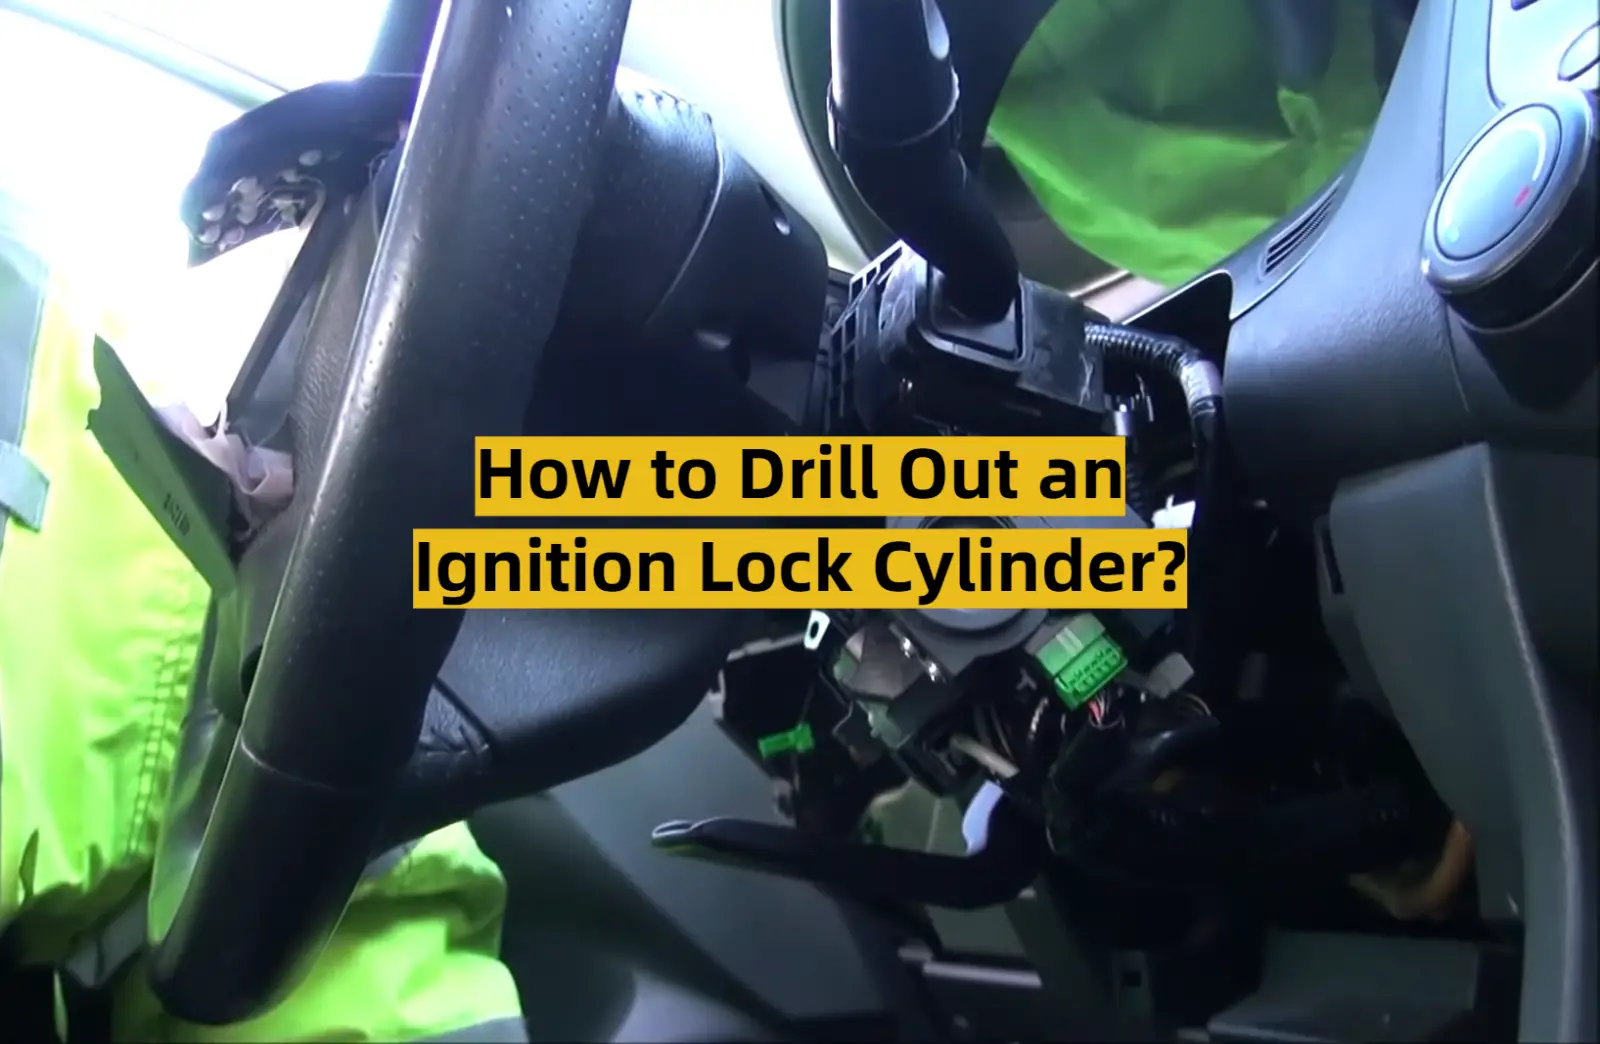 How to Drill Out an Ignition Lock Cylinder?